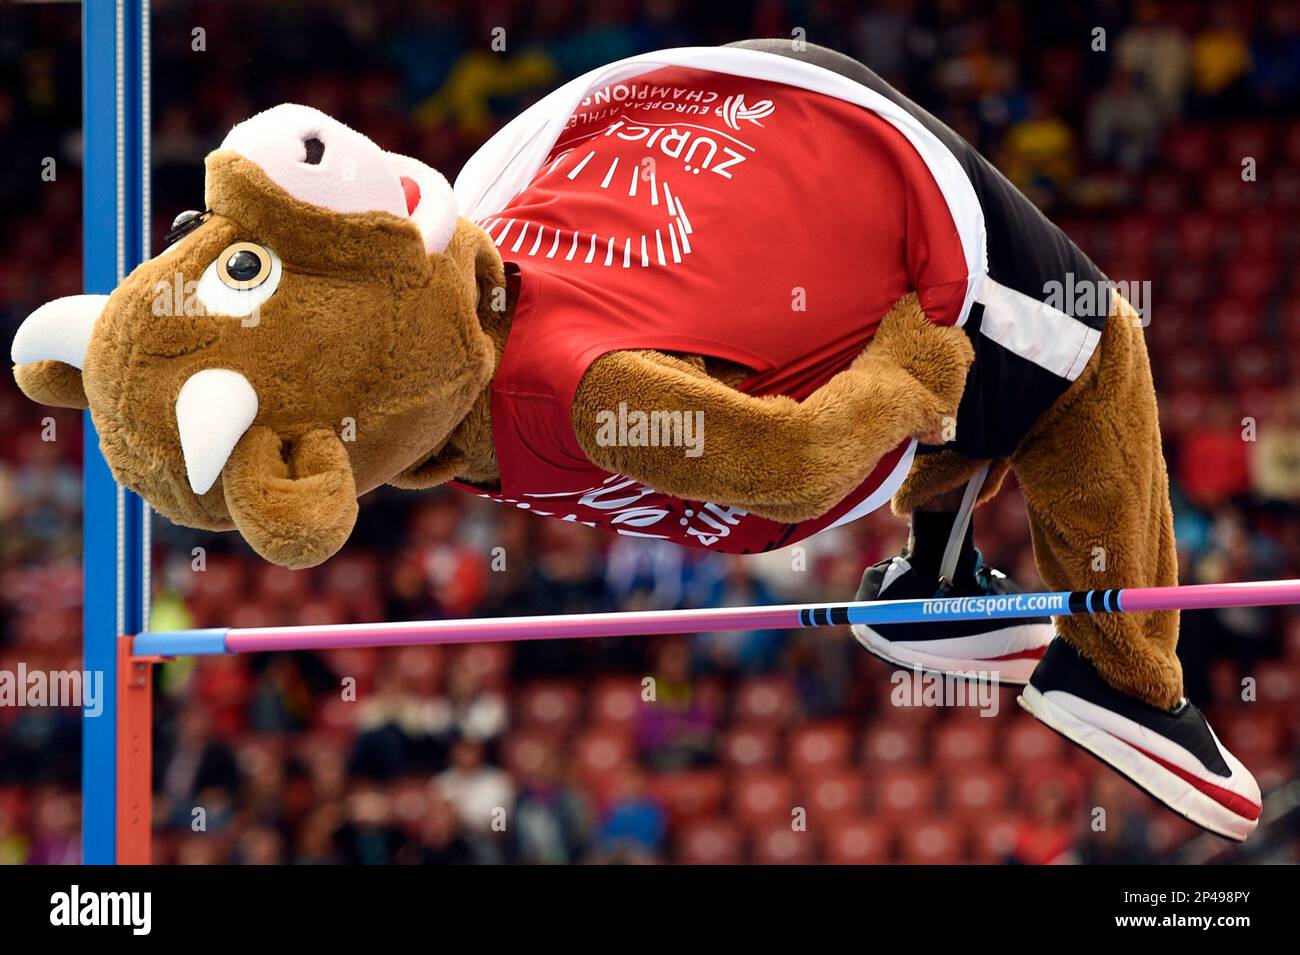 "Cooly", the mascot of the European Athletics Championships 2014, does high jump, at the third day of the European Athletics Championships in the Letzigrund Stadium in Zurich, Switzerland, Thursday, Aug. 14, 2014. (AP Photo/Keystone, Ennio Leanza) Stock Photo